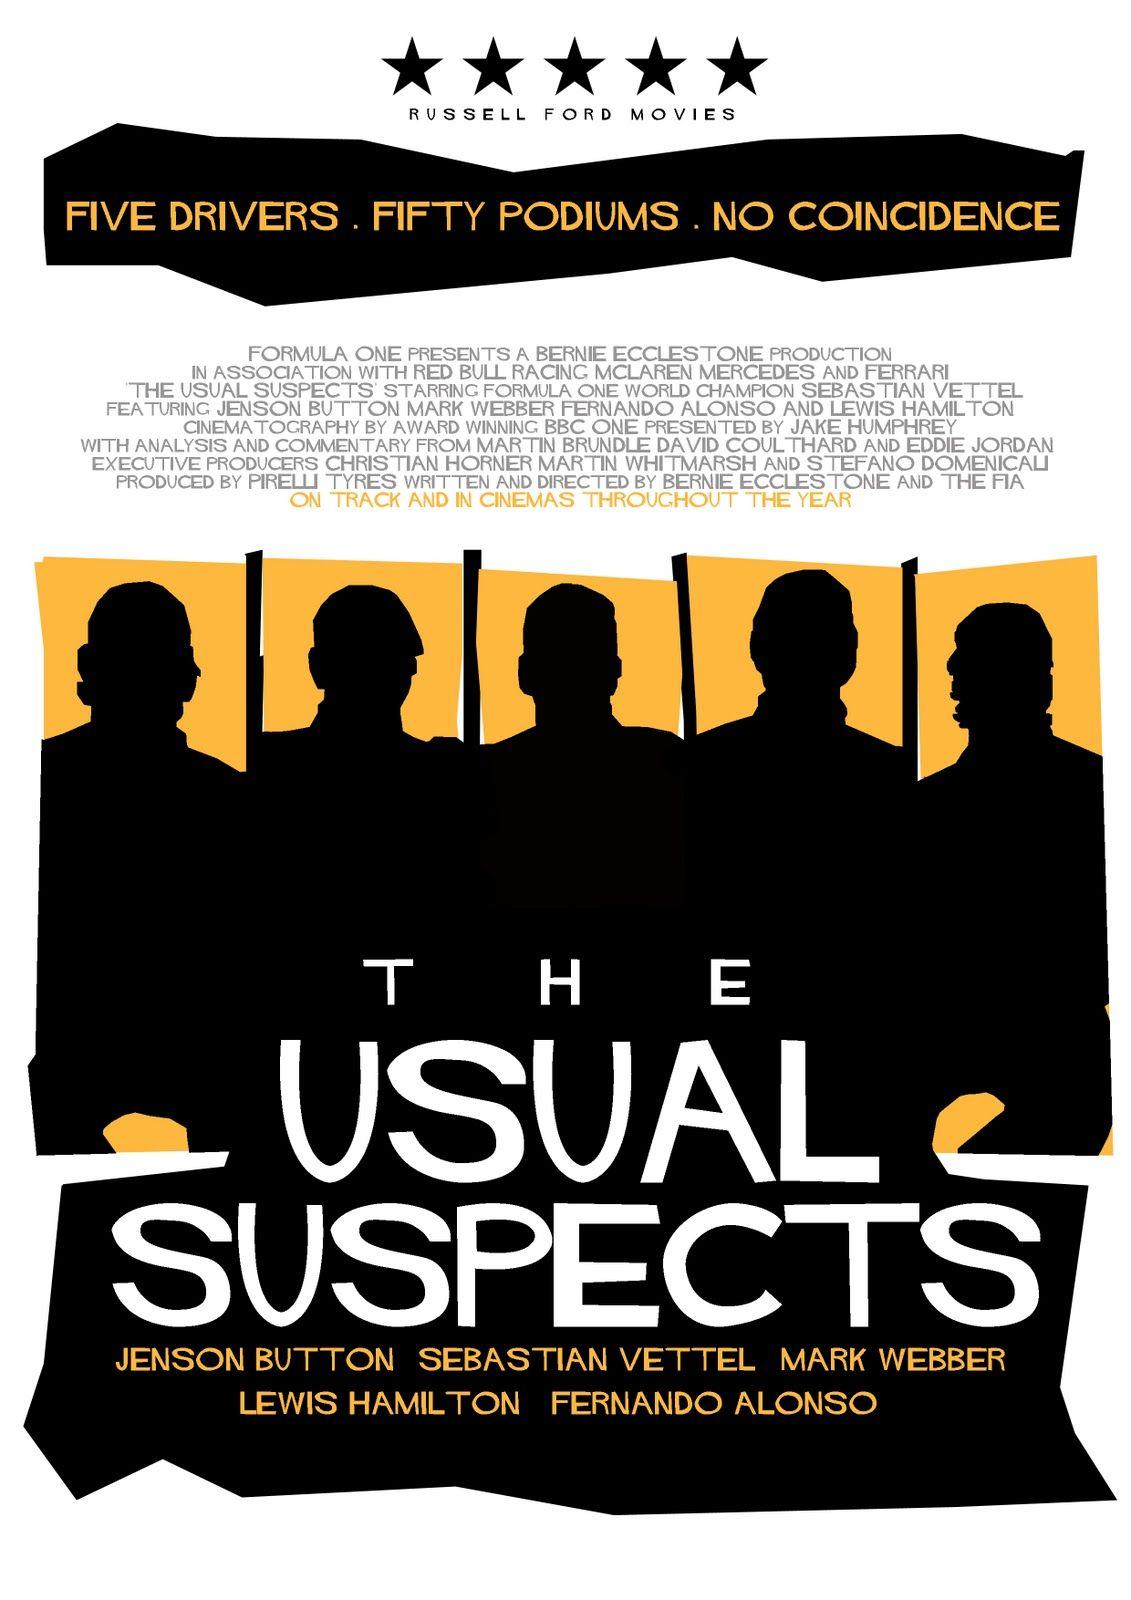 The Usual Suspects (id: 60362)